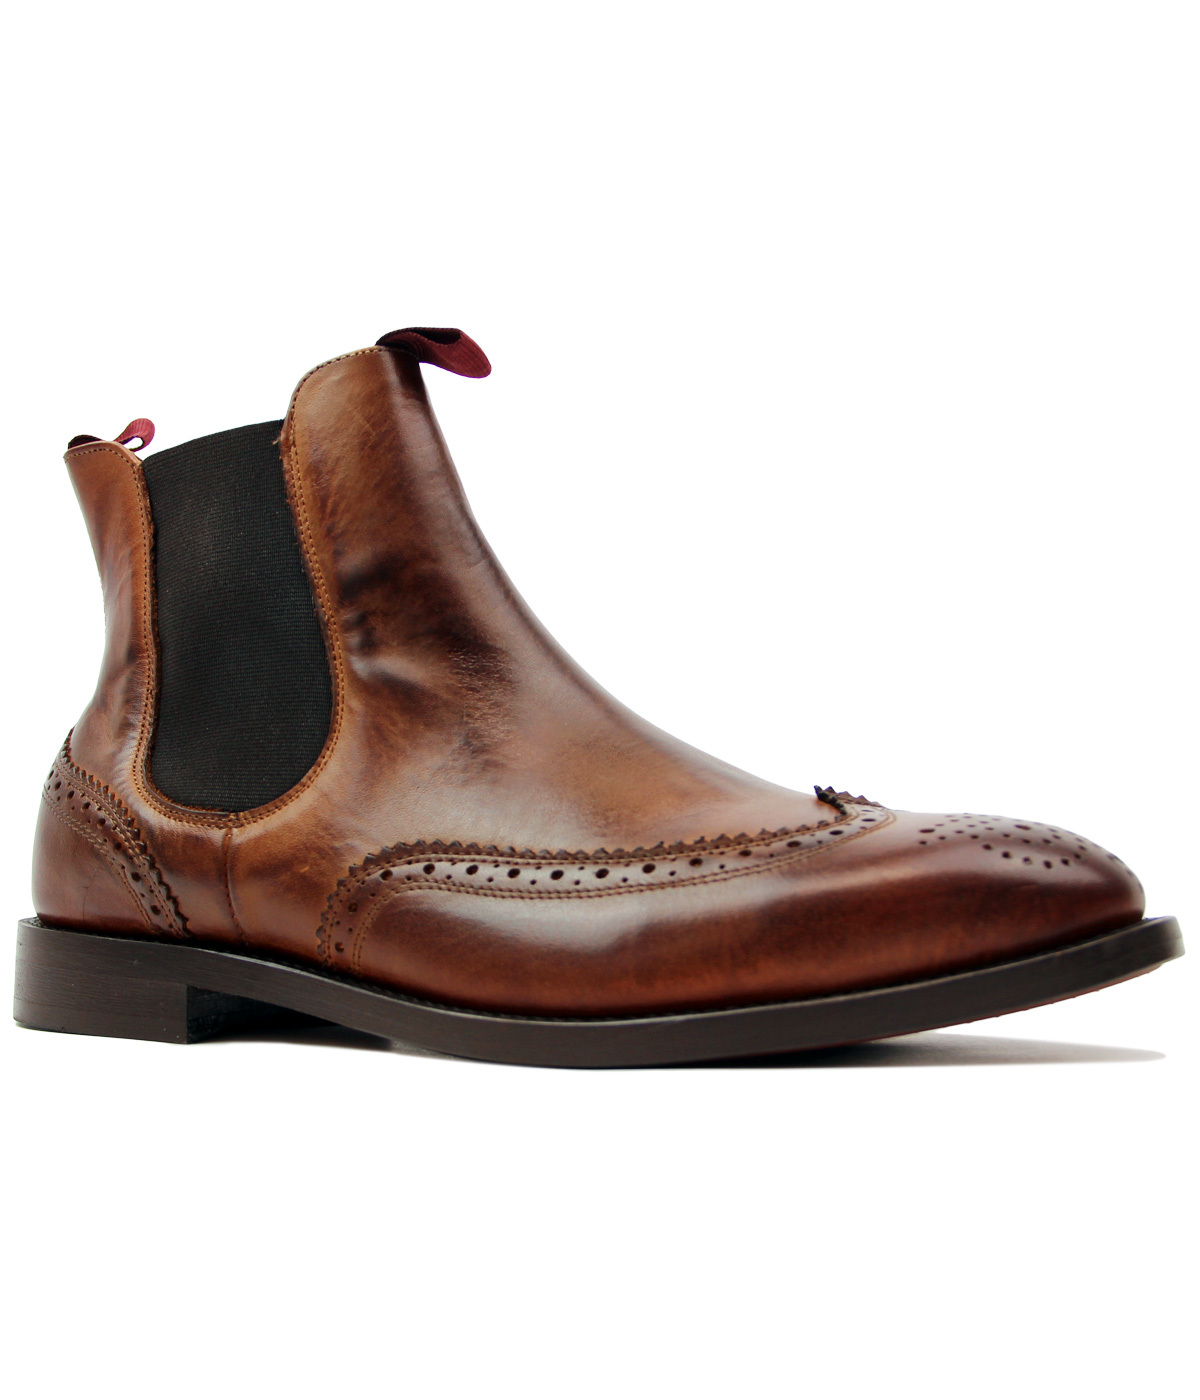 Breslin H BY HUDSON Retro Mod Brogue Chelsea Boots